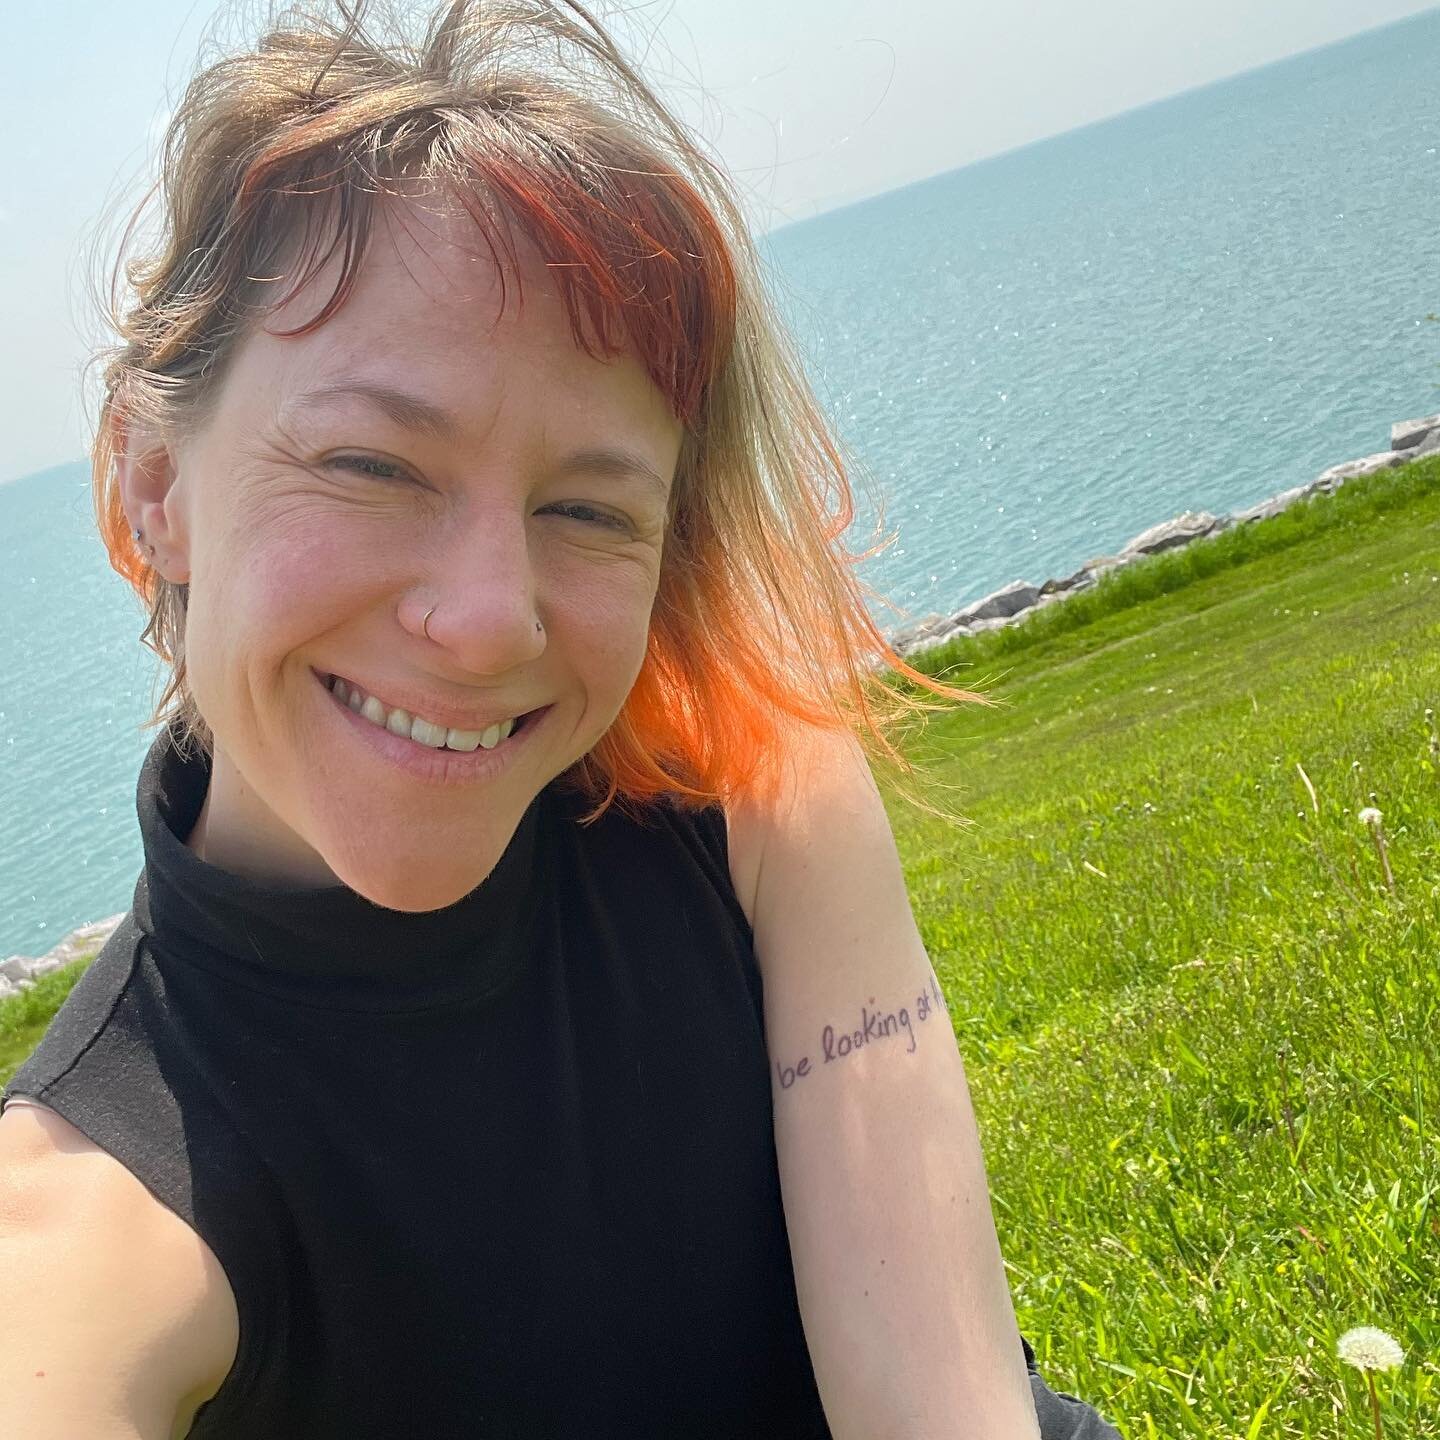 Hey hey Instagram and Facebook world! Just peeking into the digital space to say hello and please pop over to my website if you are looking for some deep breathing, slow movement and gentle strengthening in your life - yoga classes for spring/summer 